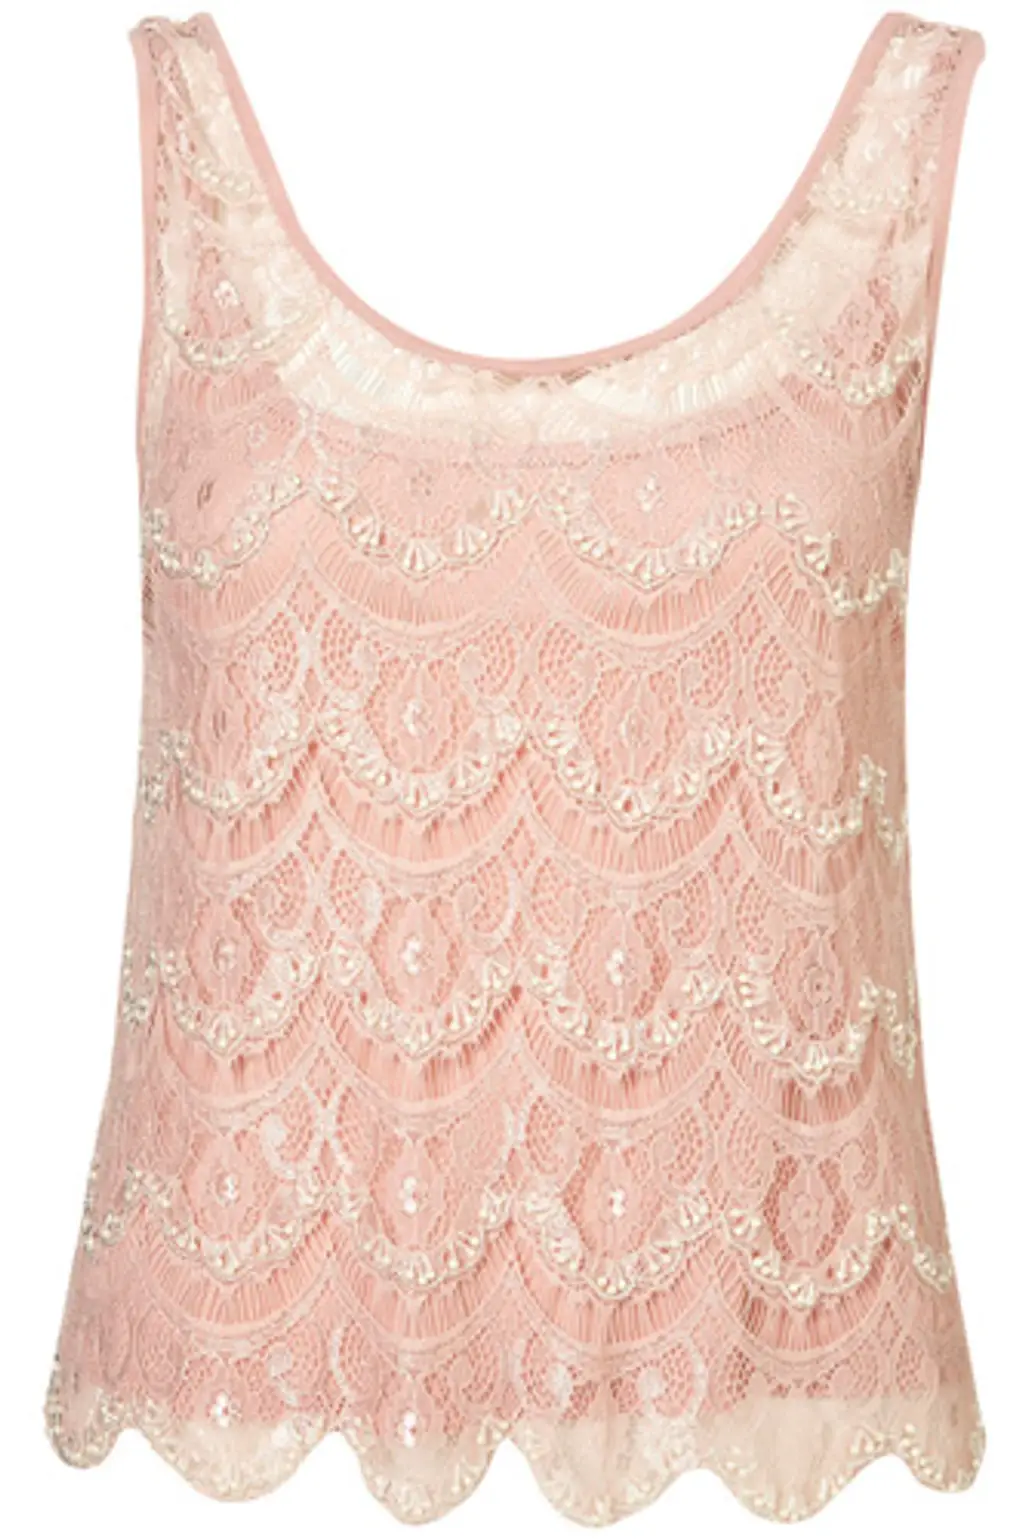 Topshop Scallop Lace Embellished Top